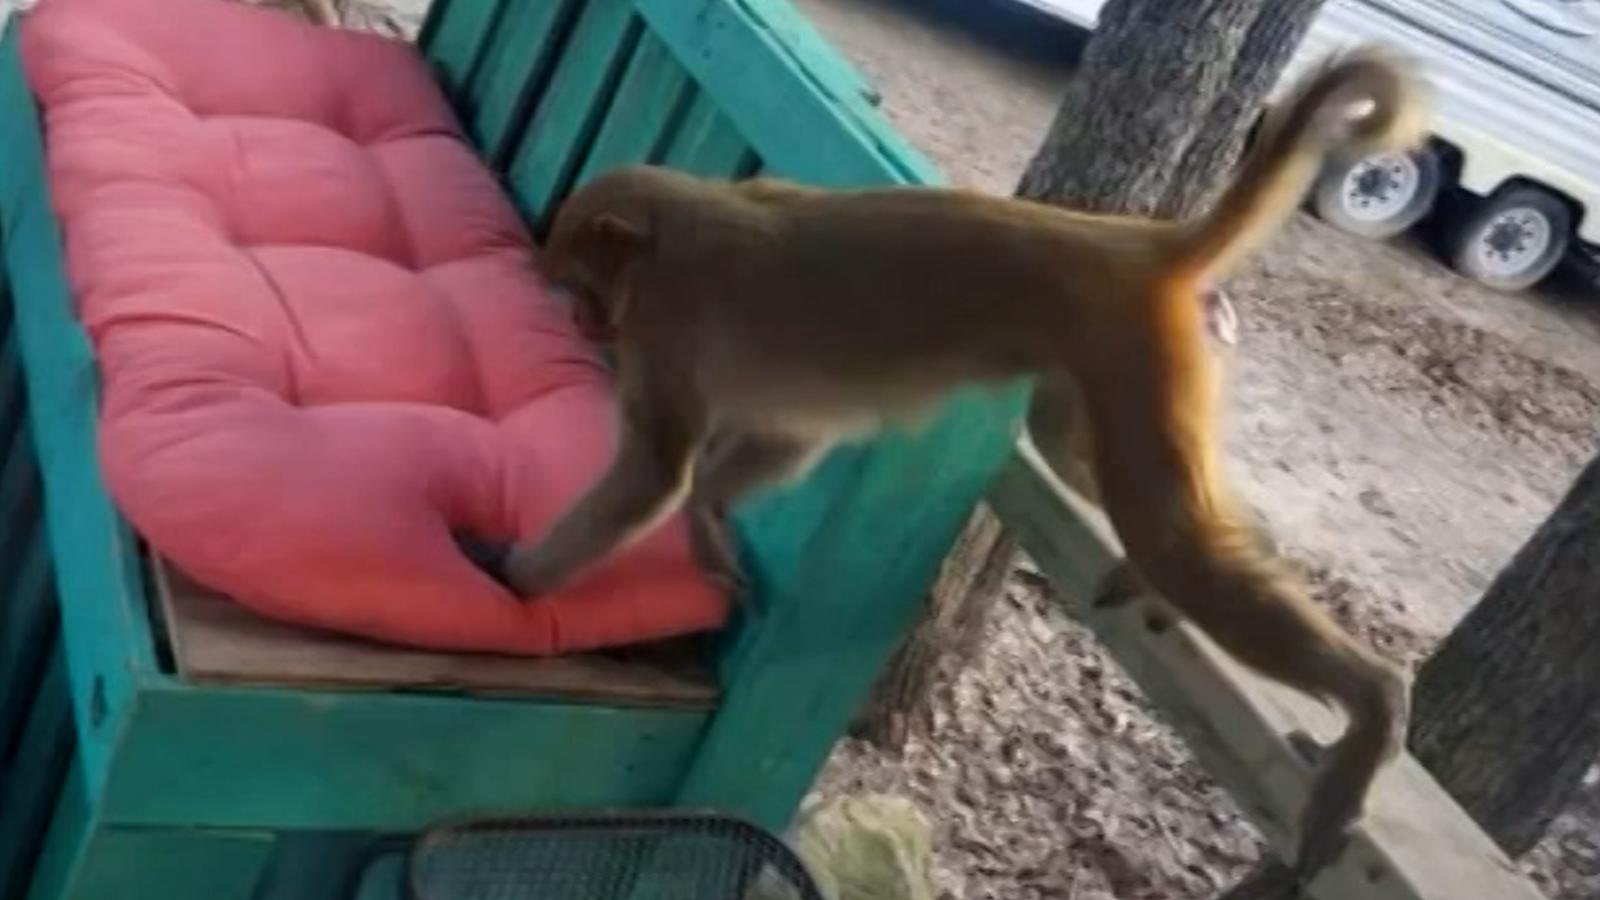 This monkey attacks a woman and tears off part of her ear